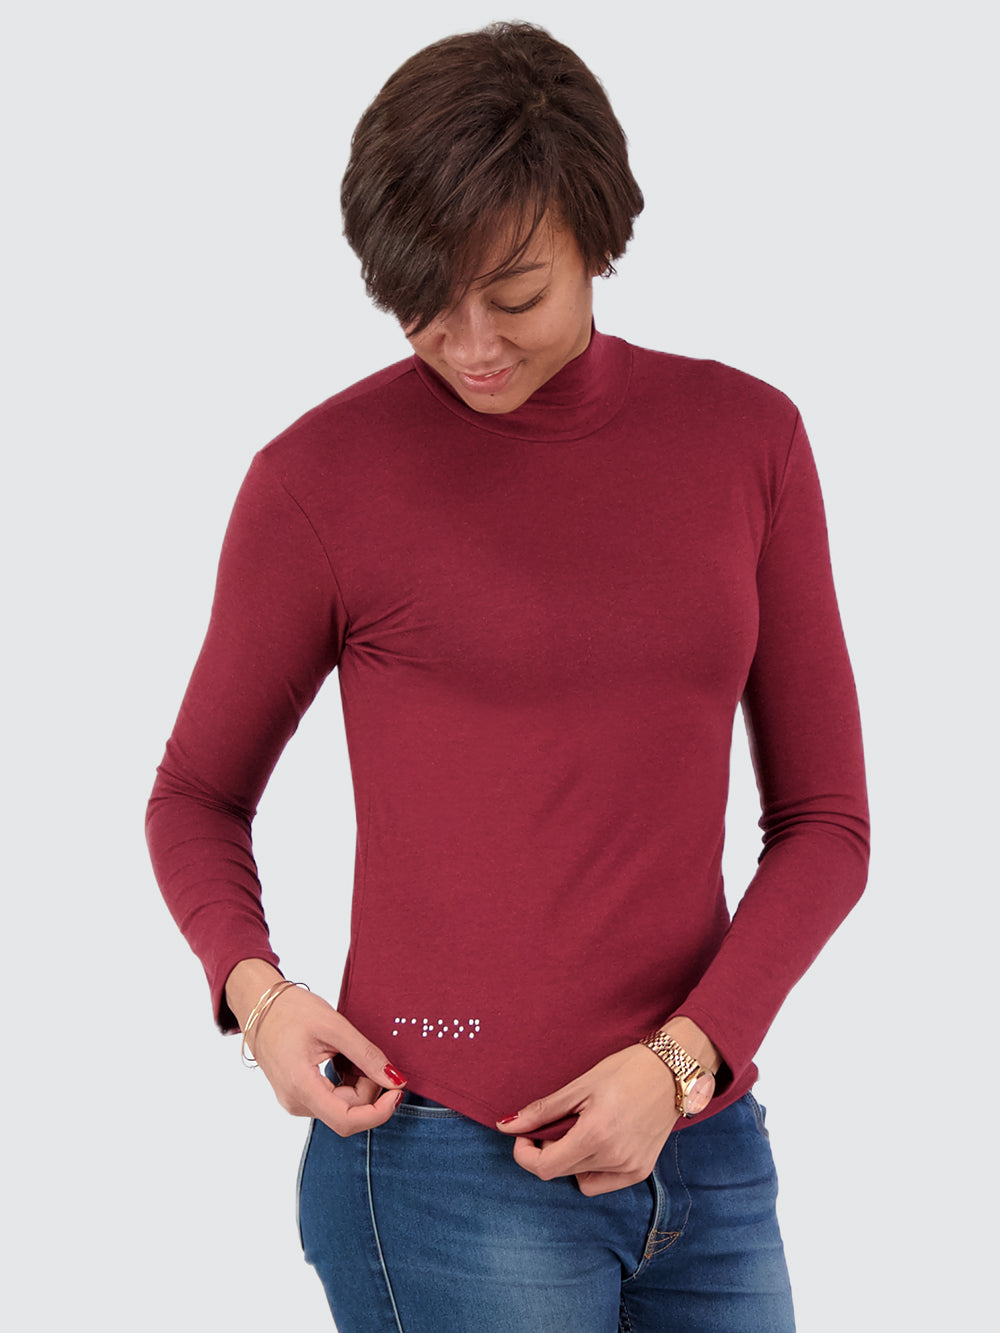 Two Blind Brothers - Womens Women's Turtleneck Maroon